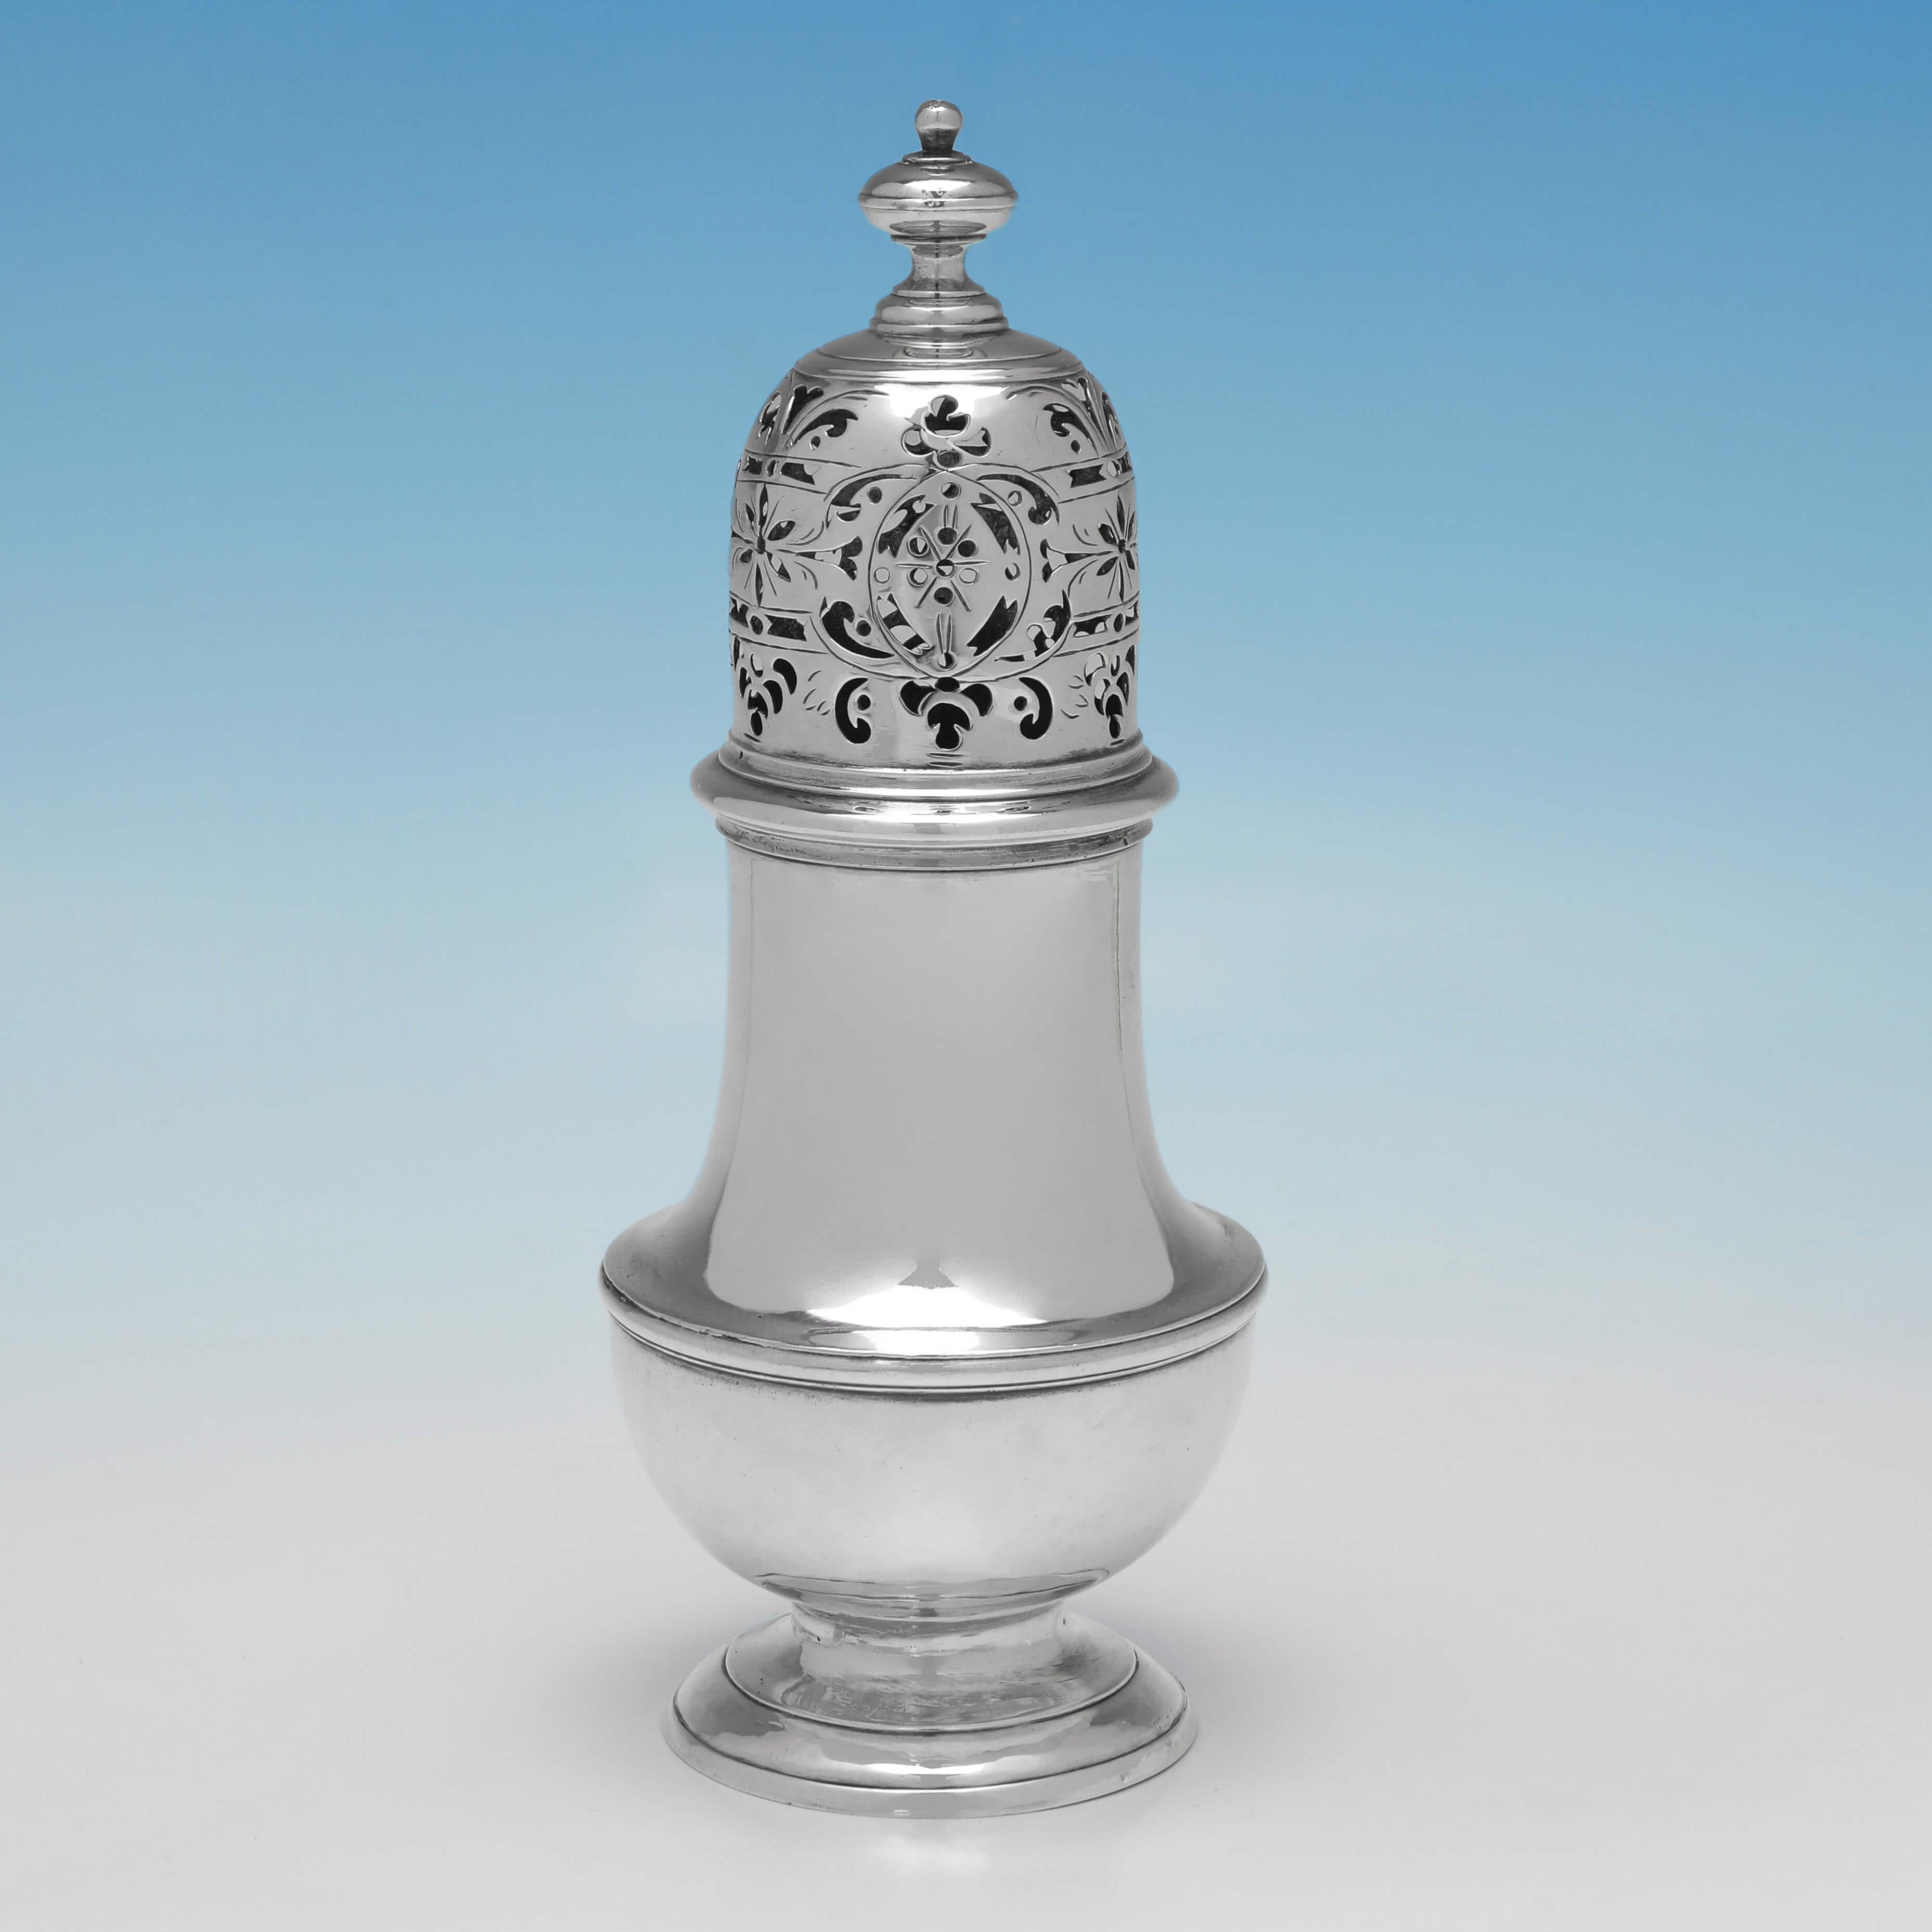 Hallmarked in London in 1728 by Samuel Welder, this very handsome, George II, Antique Sterling Silver Caster Set, is made up of 2 pepper casters and a sugar caster in the traditional form. The sugar caster measures 6.5